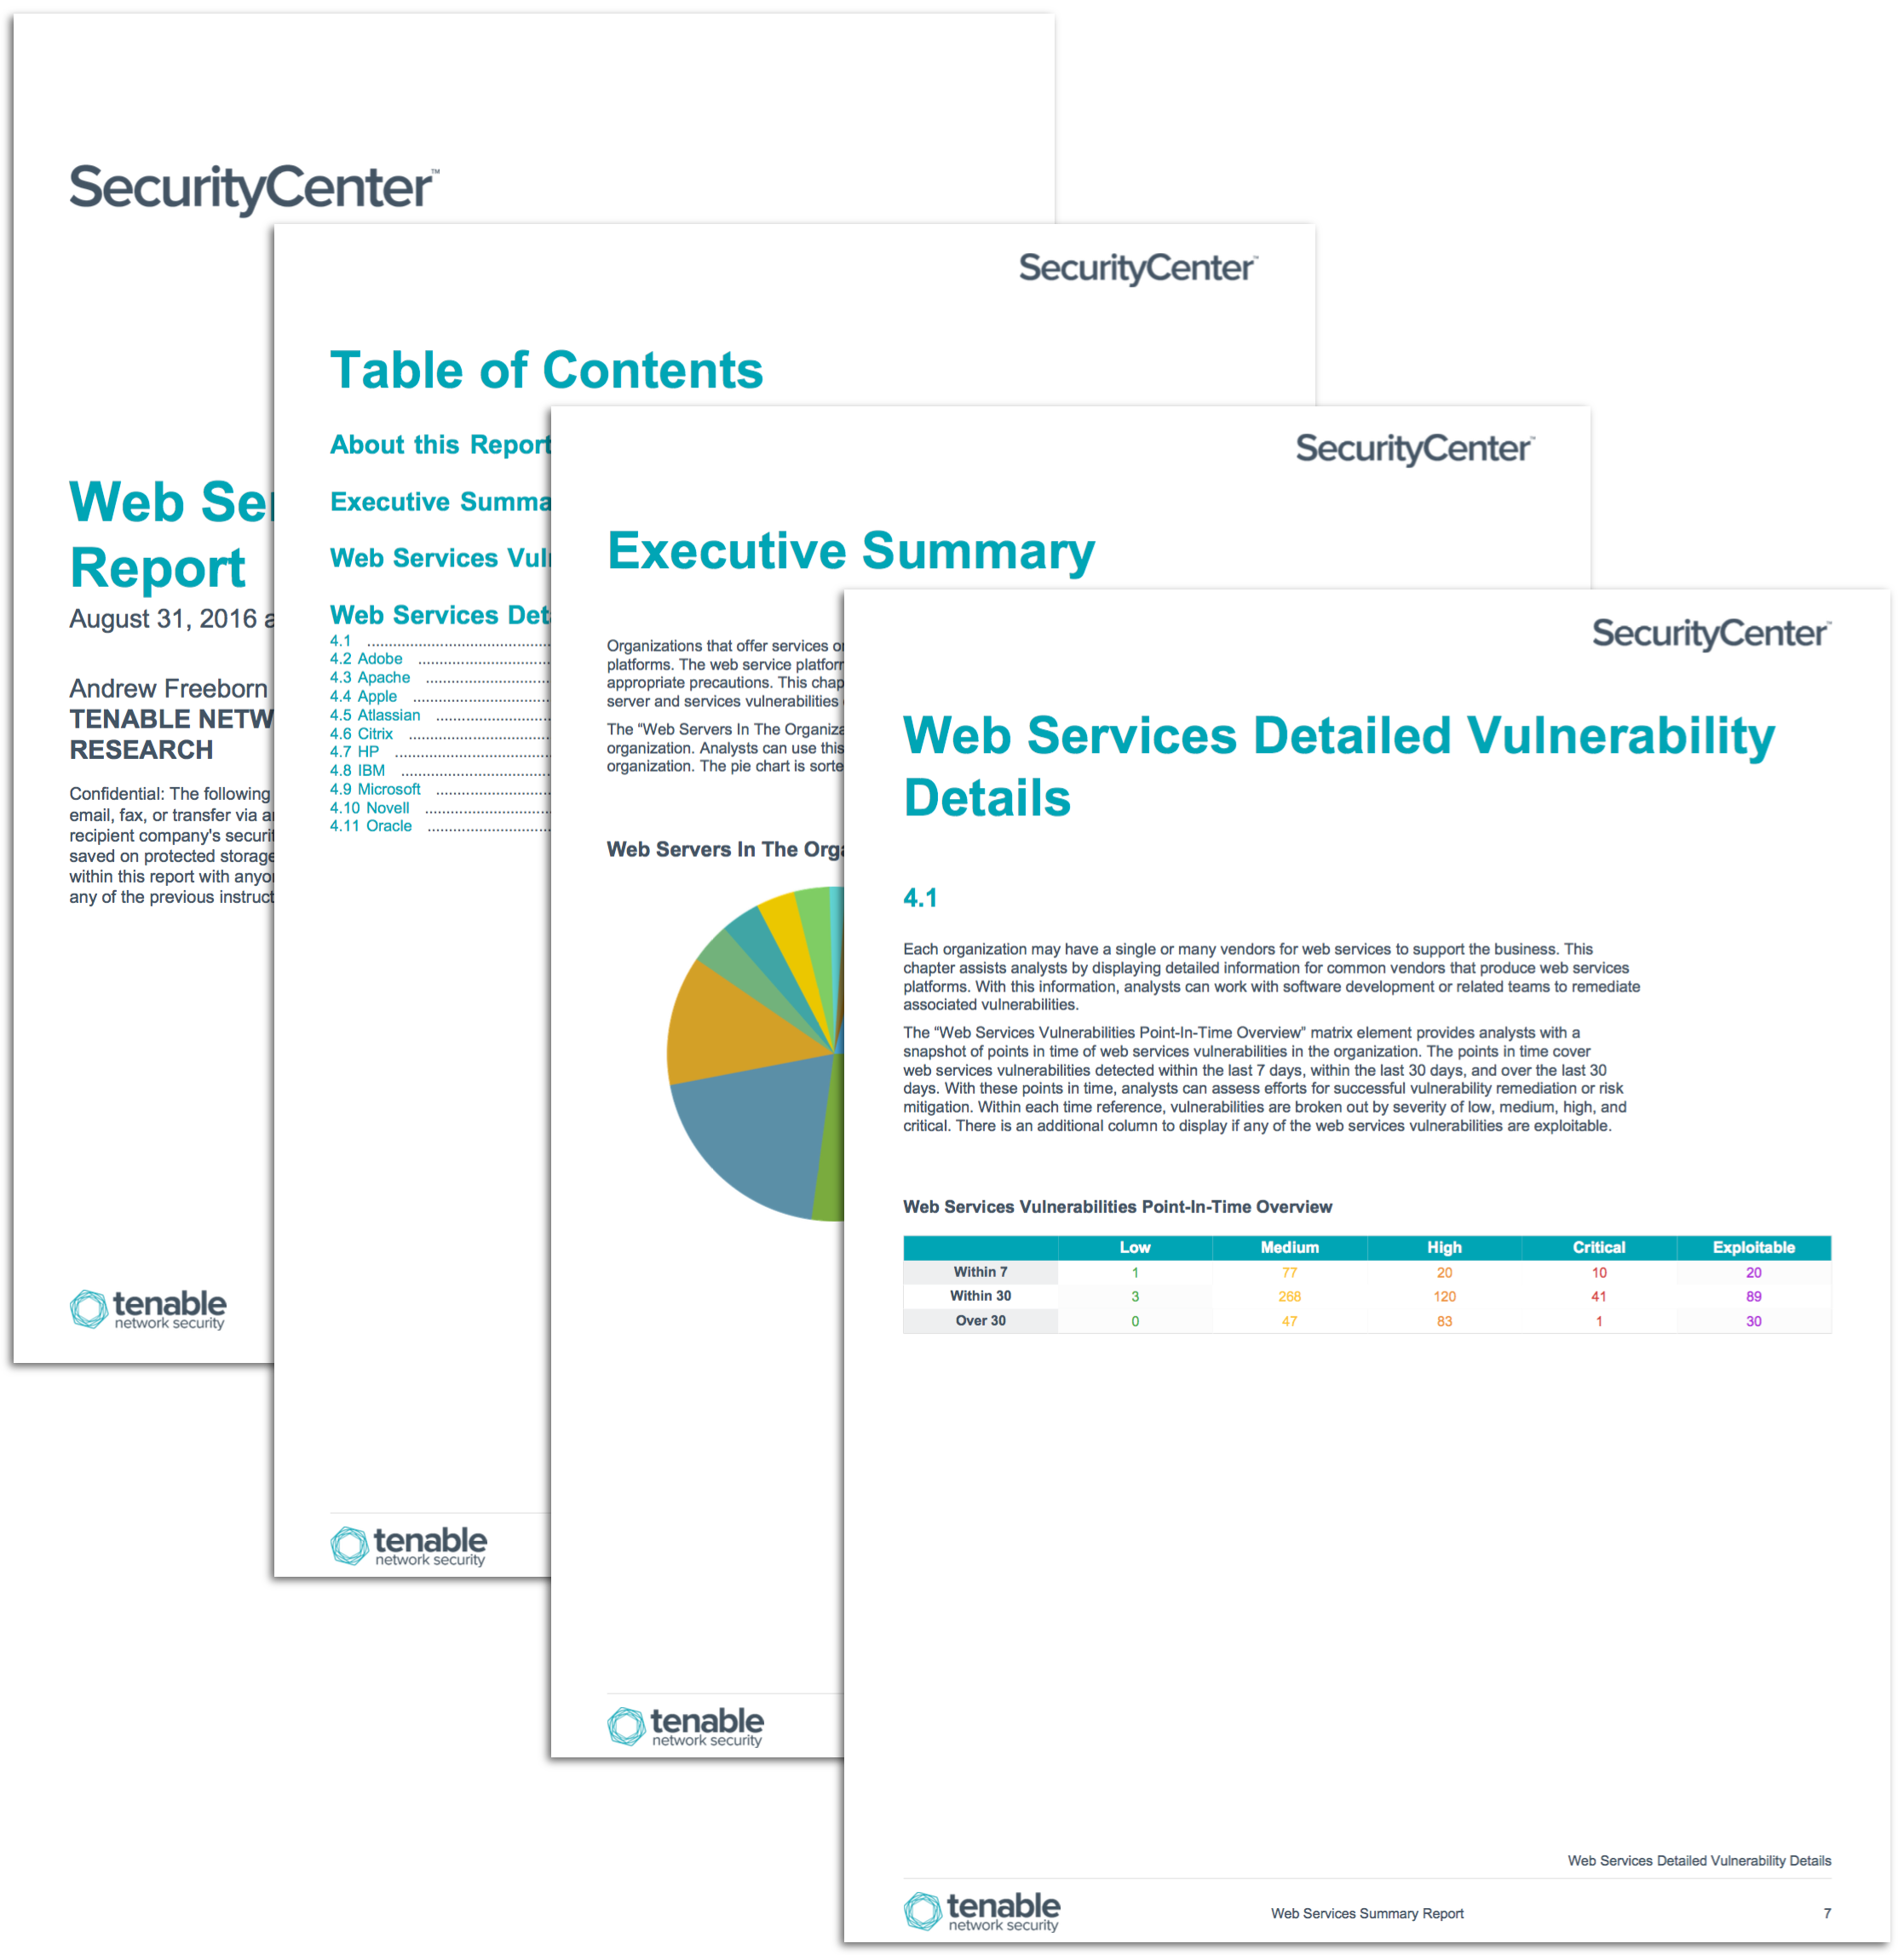 Web Services Summary Report